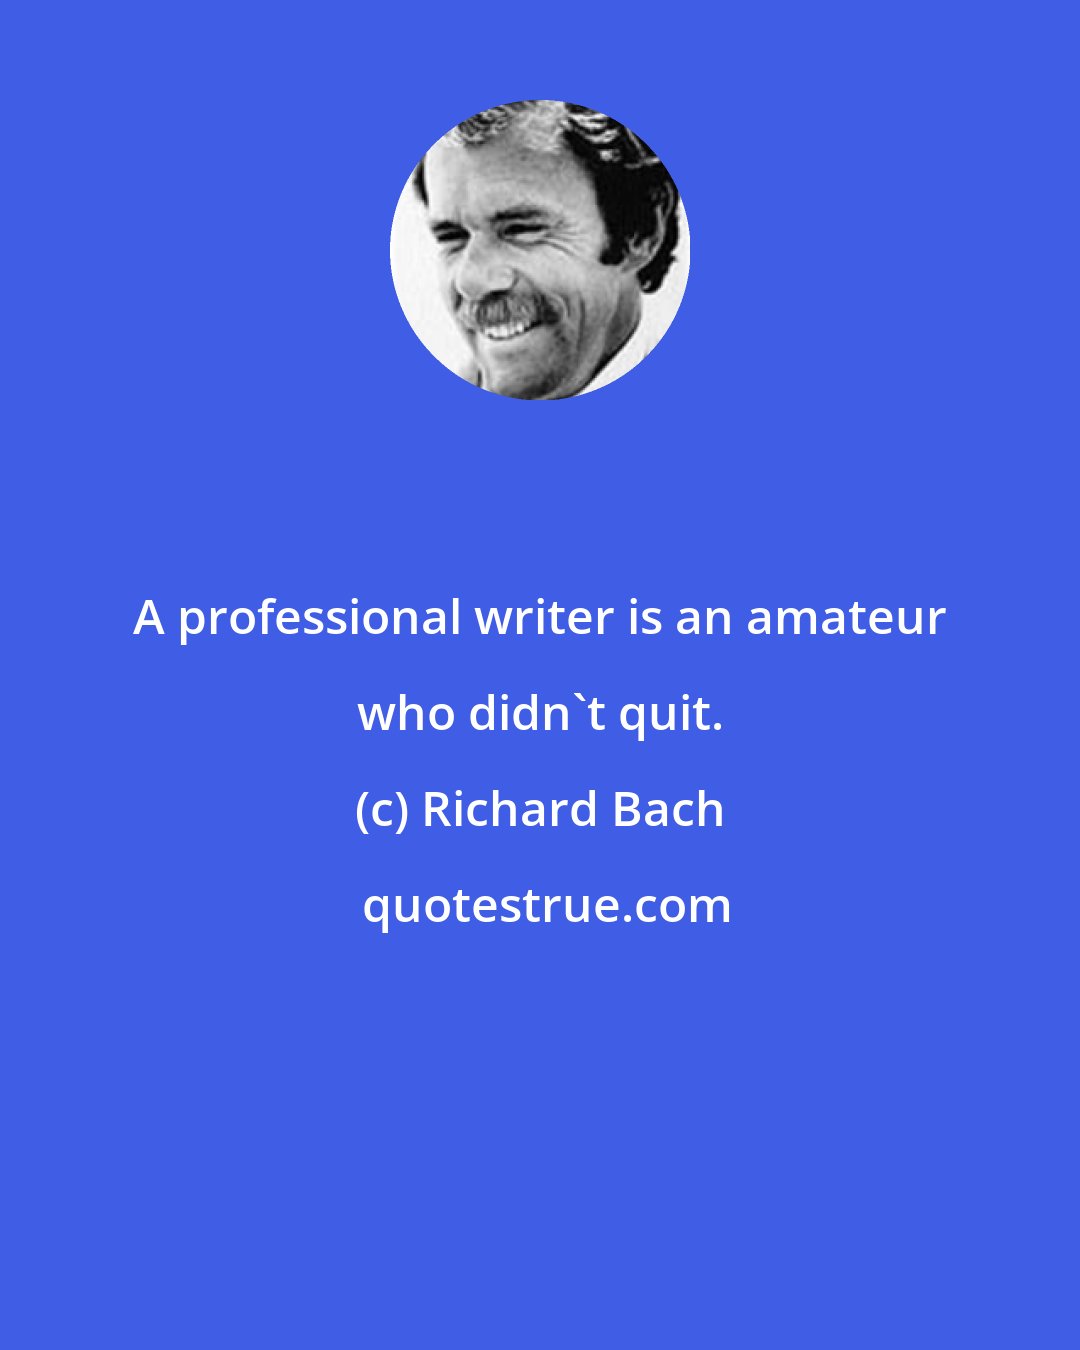 Richard Bach: A professional writer is an amateur who didn't quit.